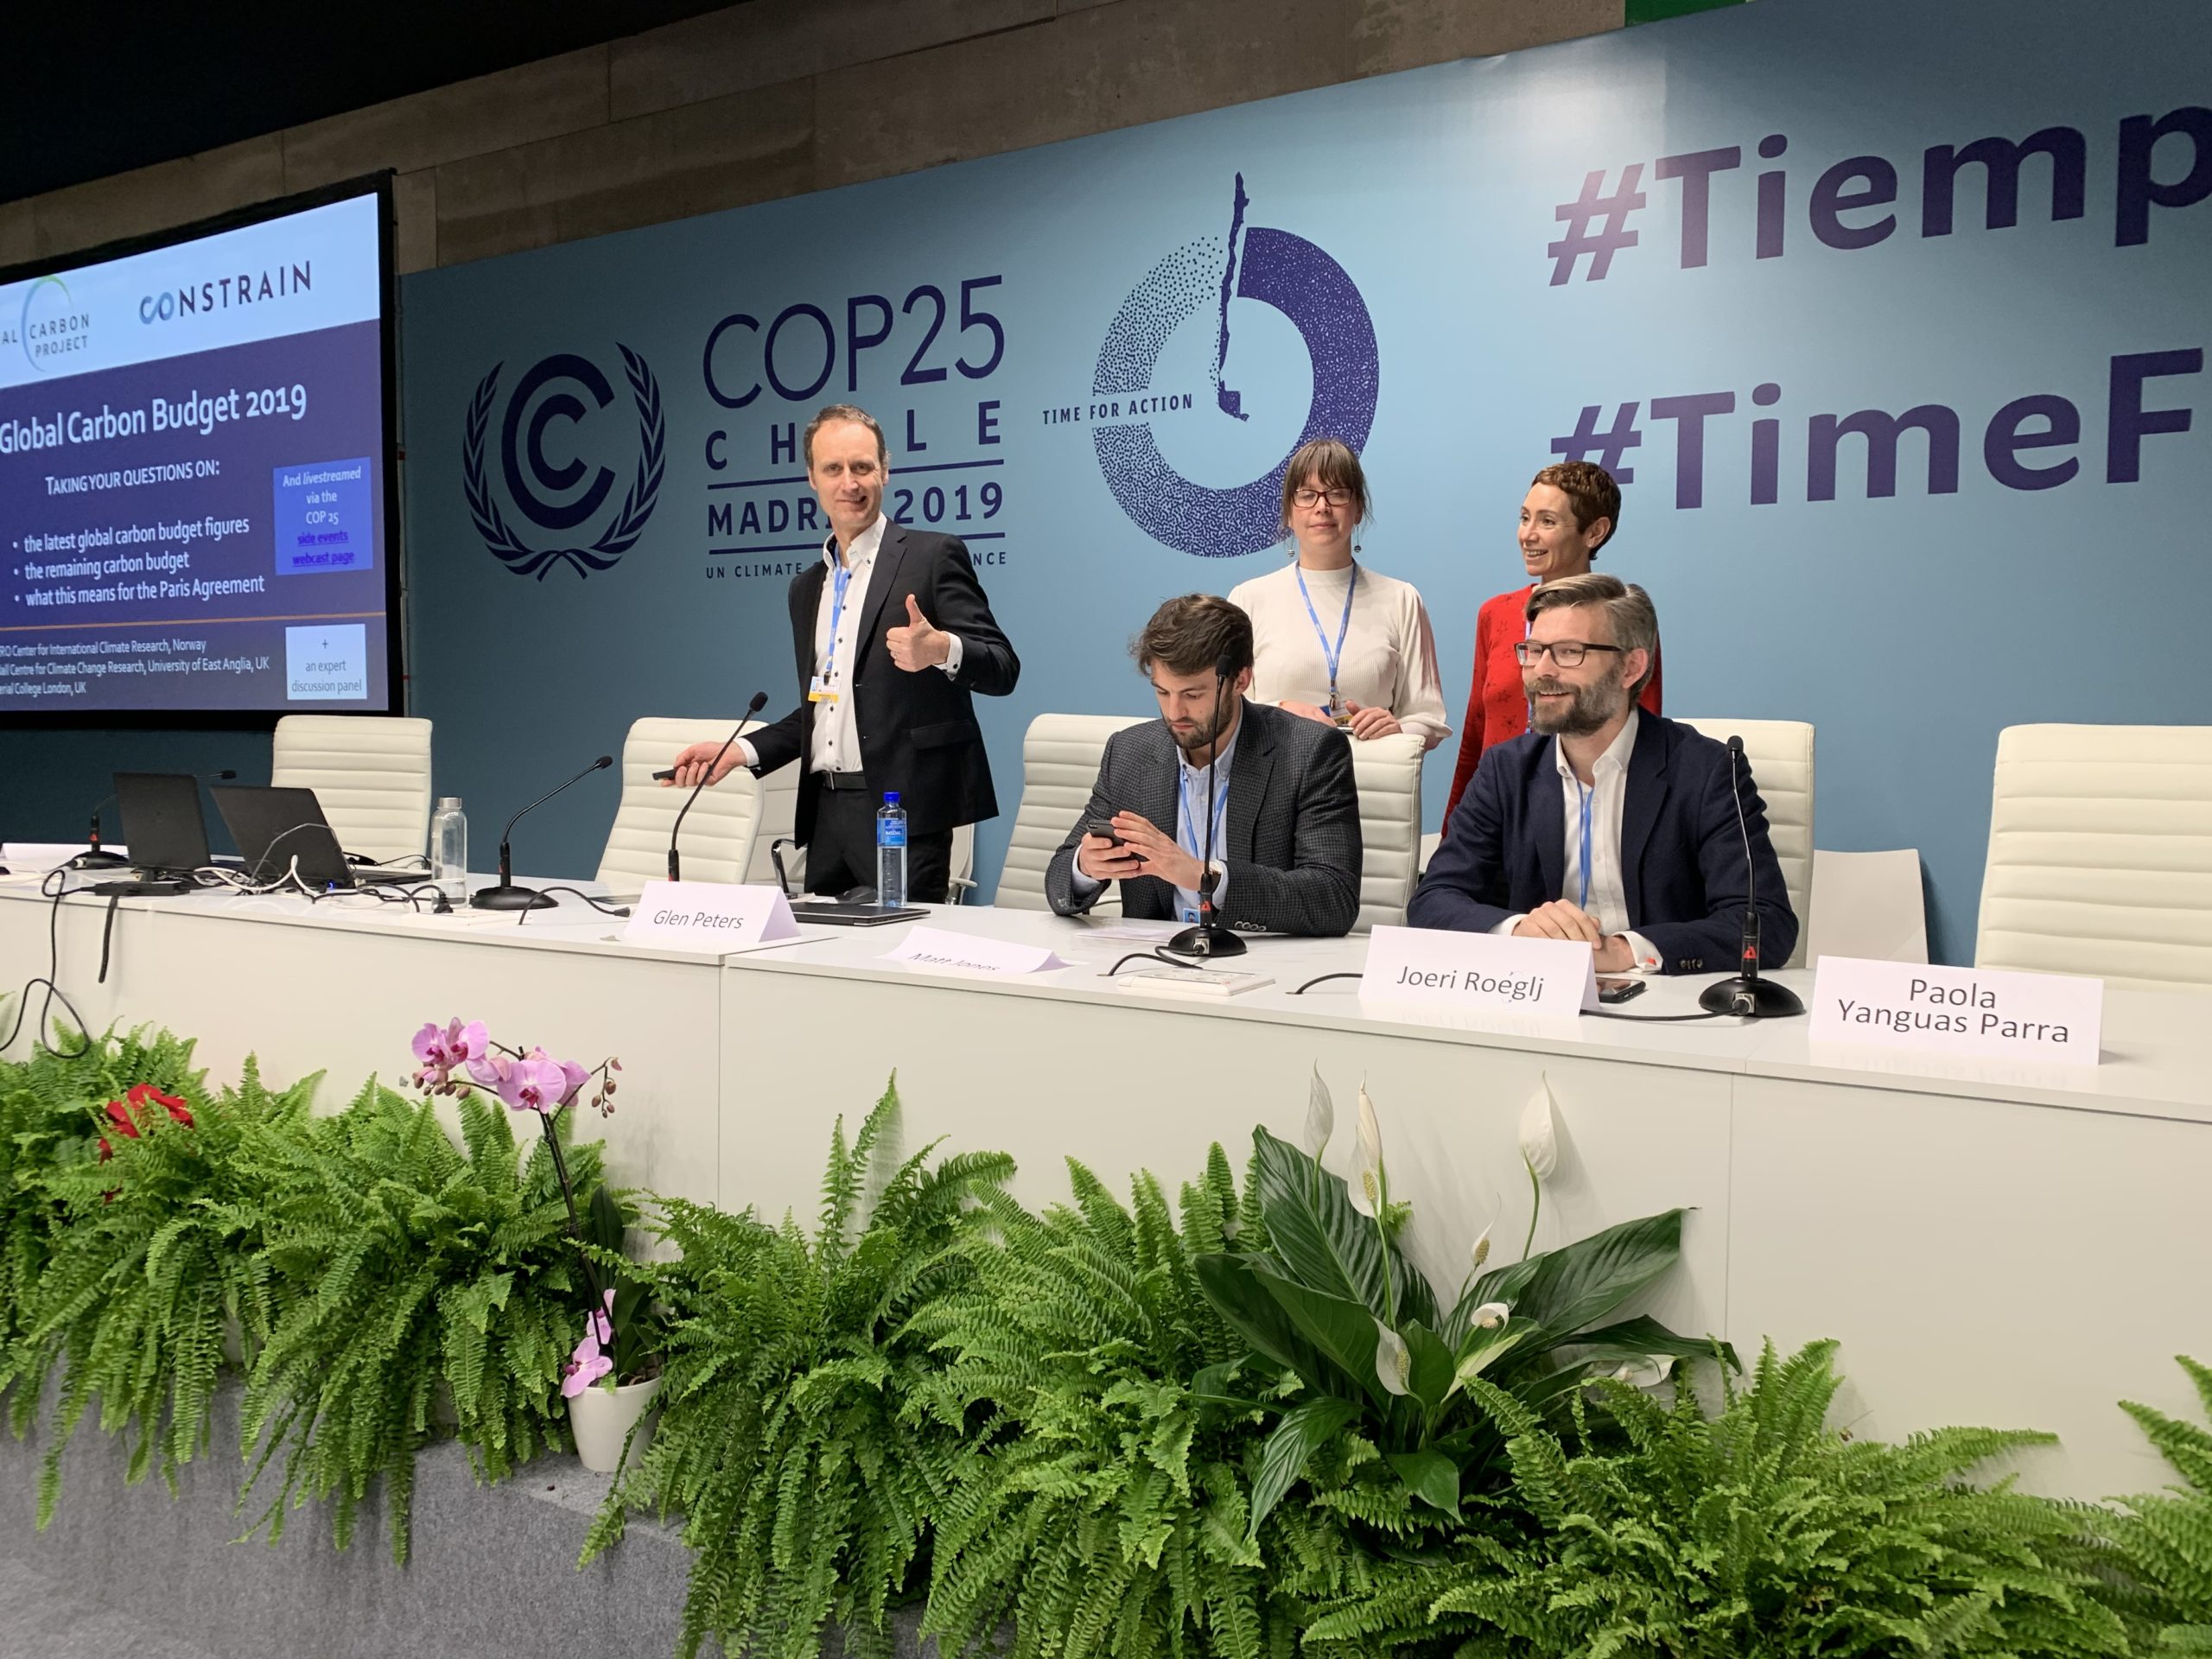 Panel of people sat at a table with microphones and slide presentation behind them at COP25 in Madrid 2019